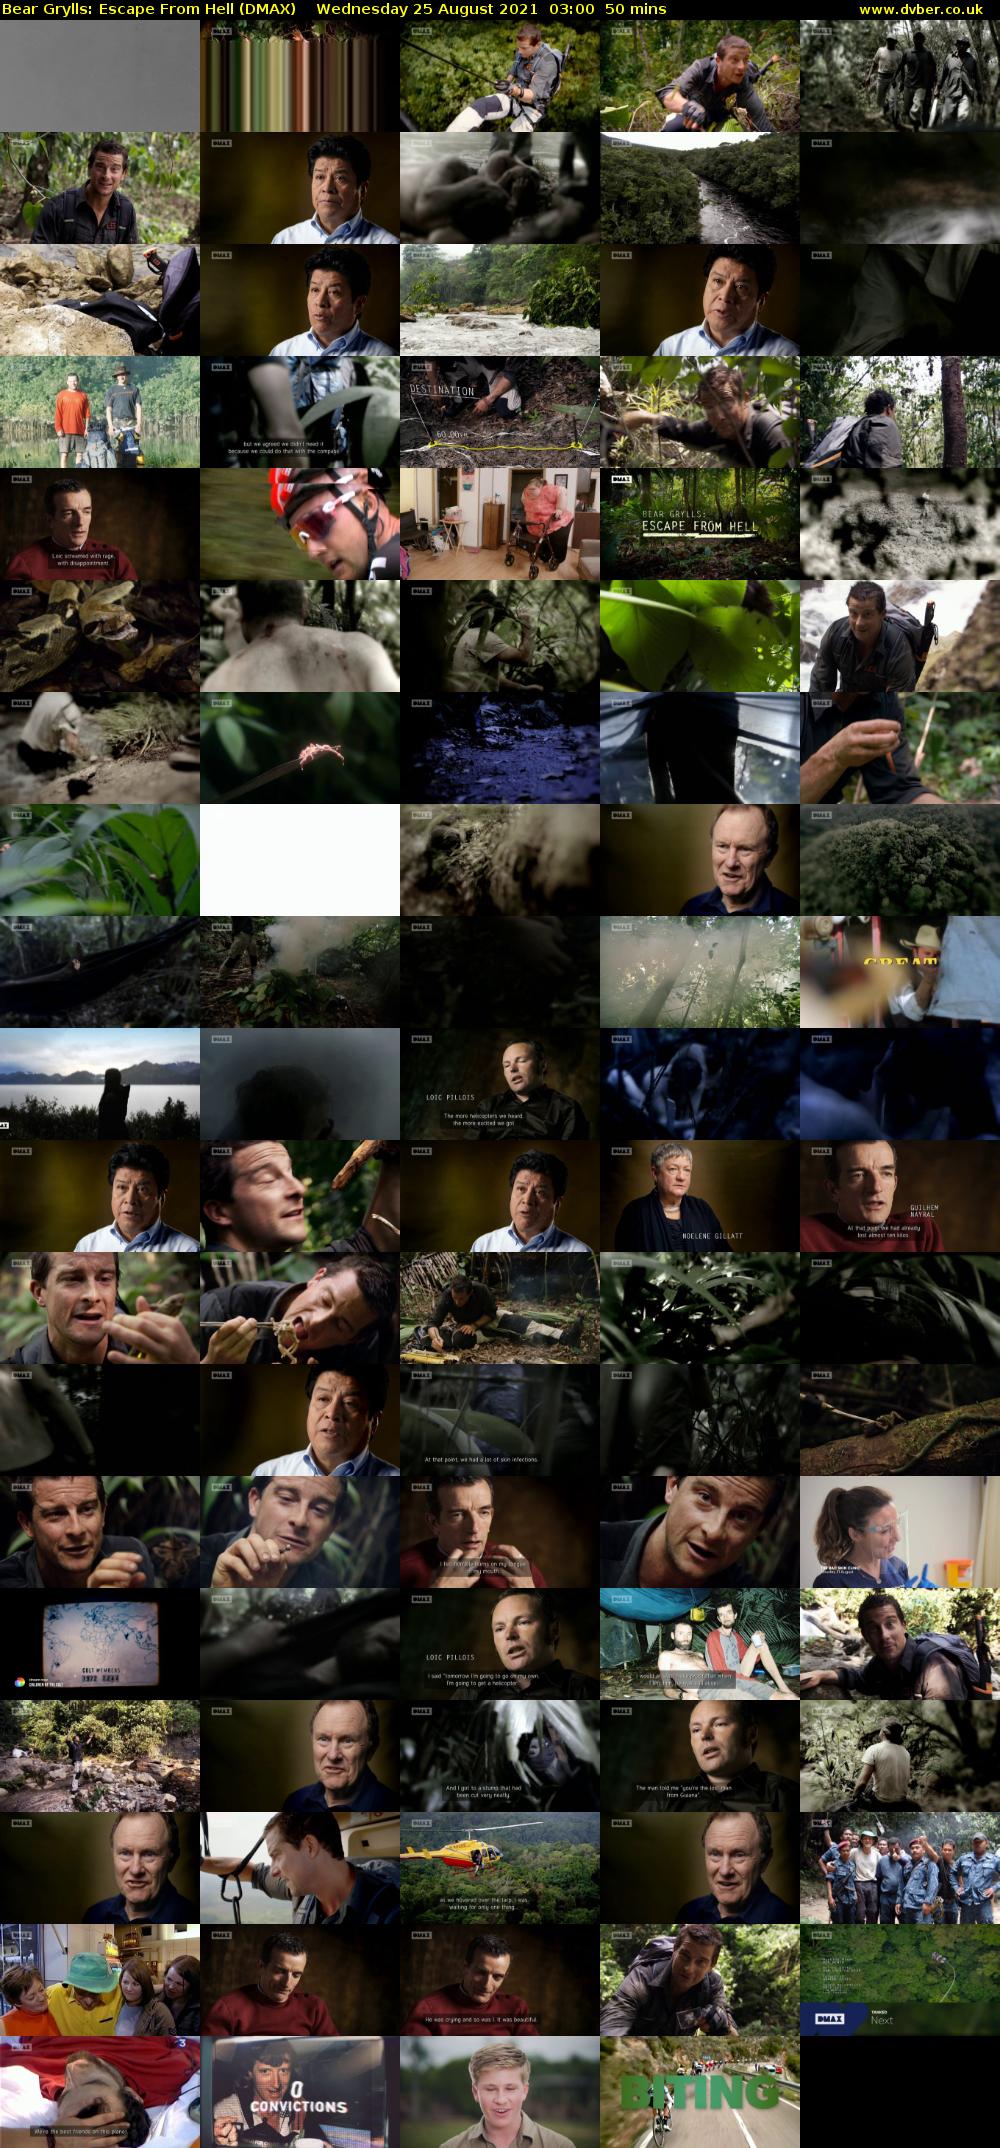 Bear Grylls: Escape From Hell (DMAX) Wednesday 25 August 2021 03:00 - 03:50